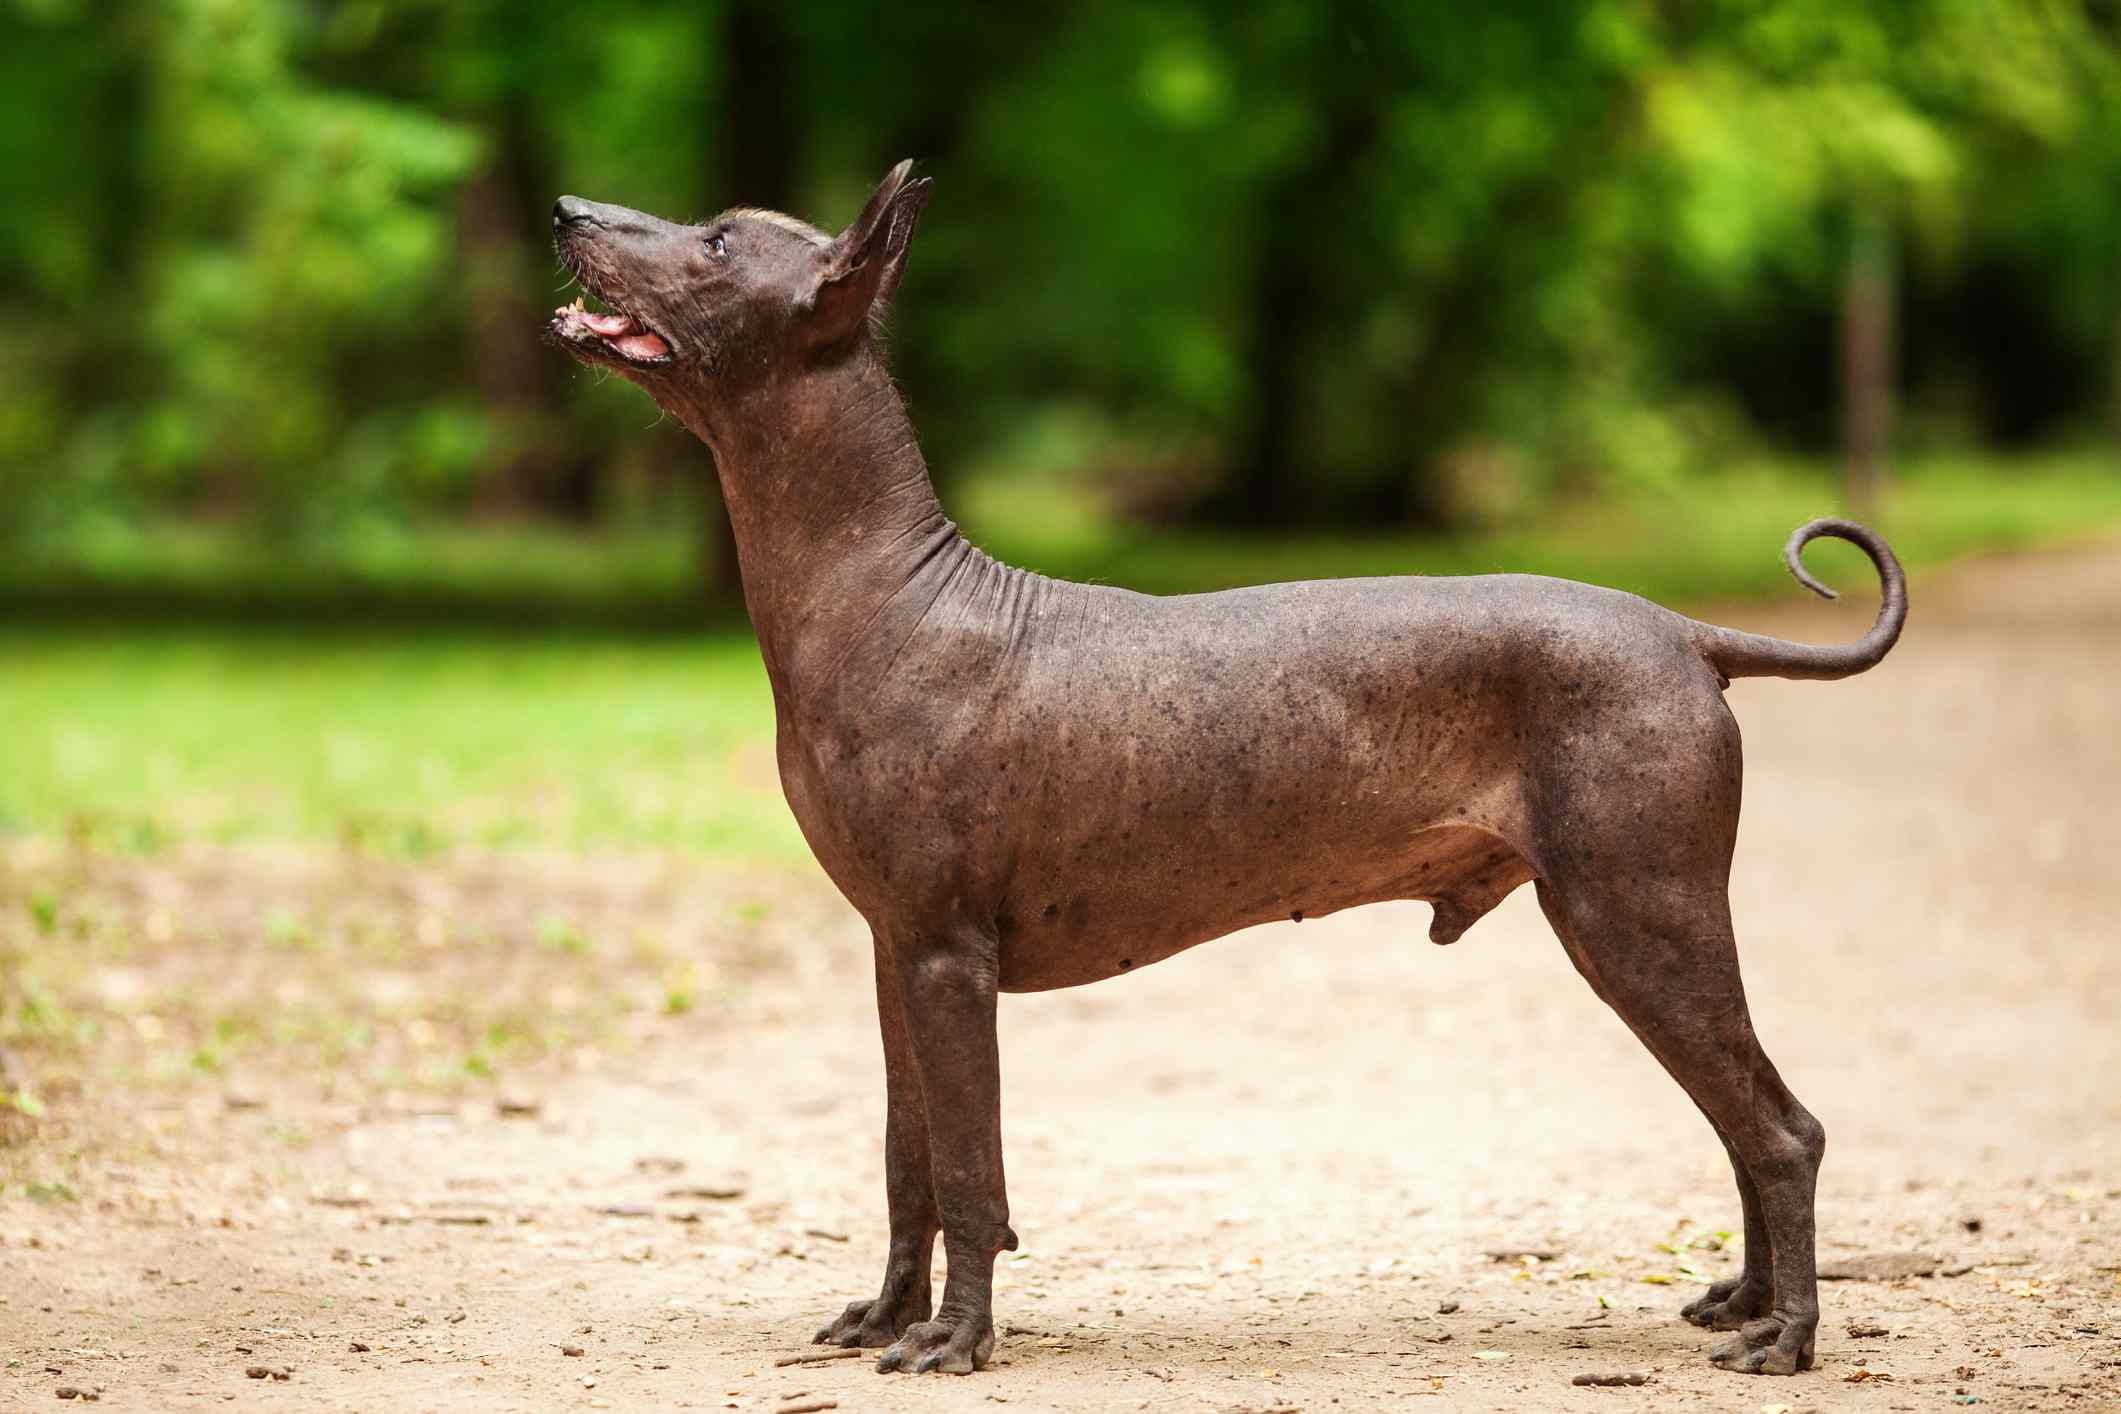 The profile of a hairless dog with black skin standing on a trail.